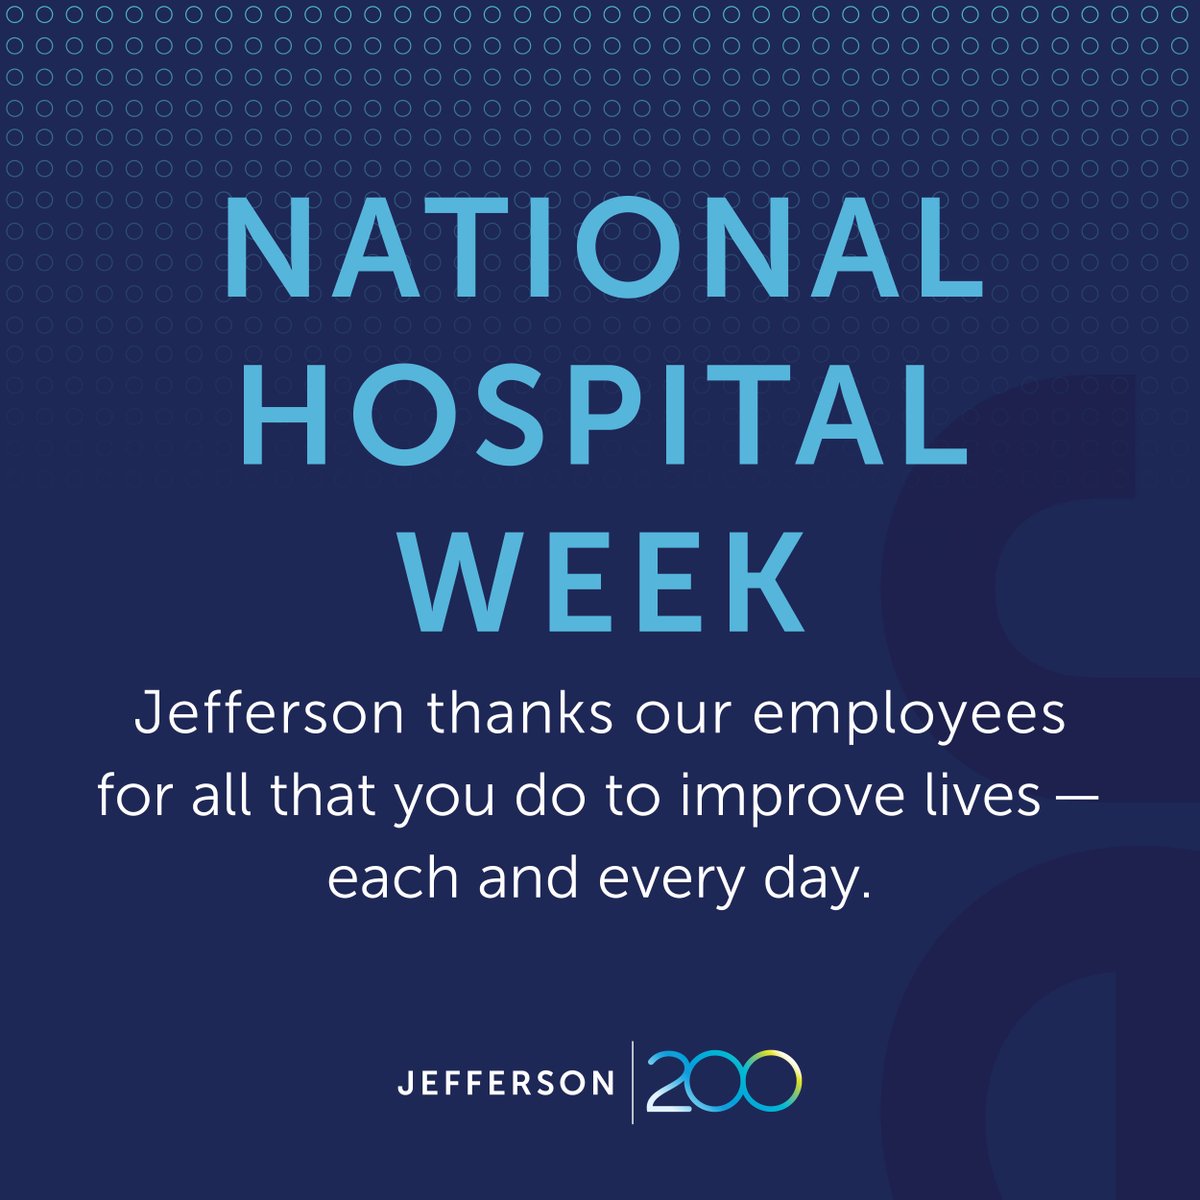 Happy National Hospital Week to our dedicated staff! #TeamJefferson